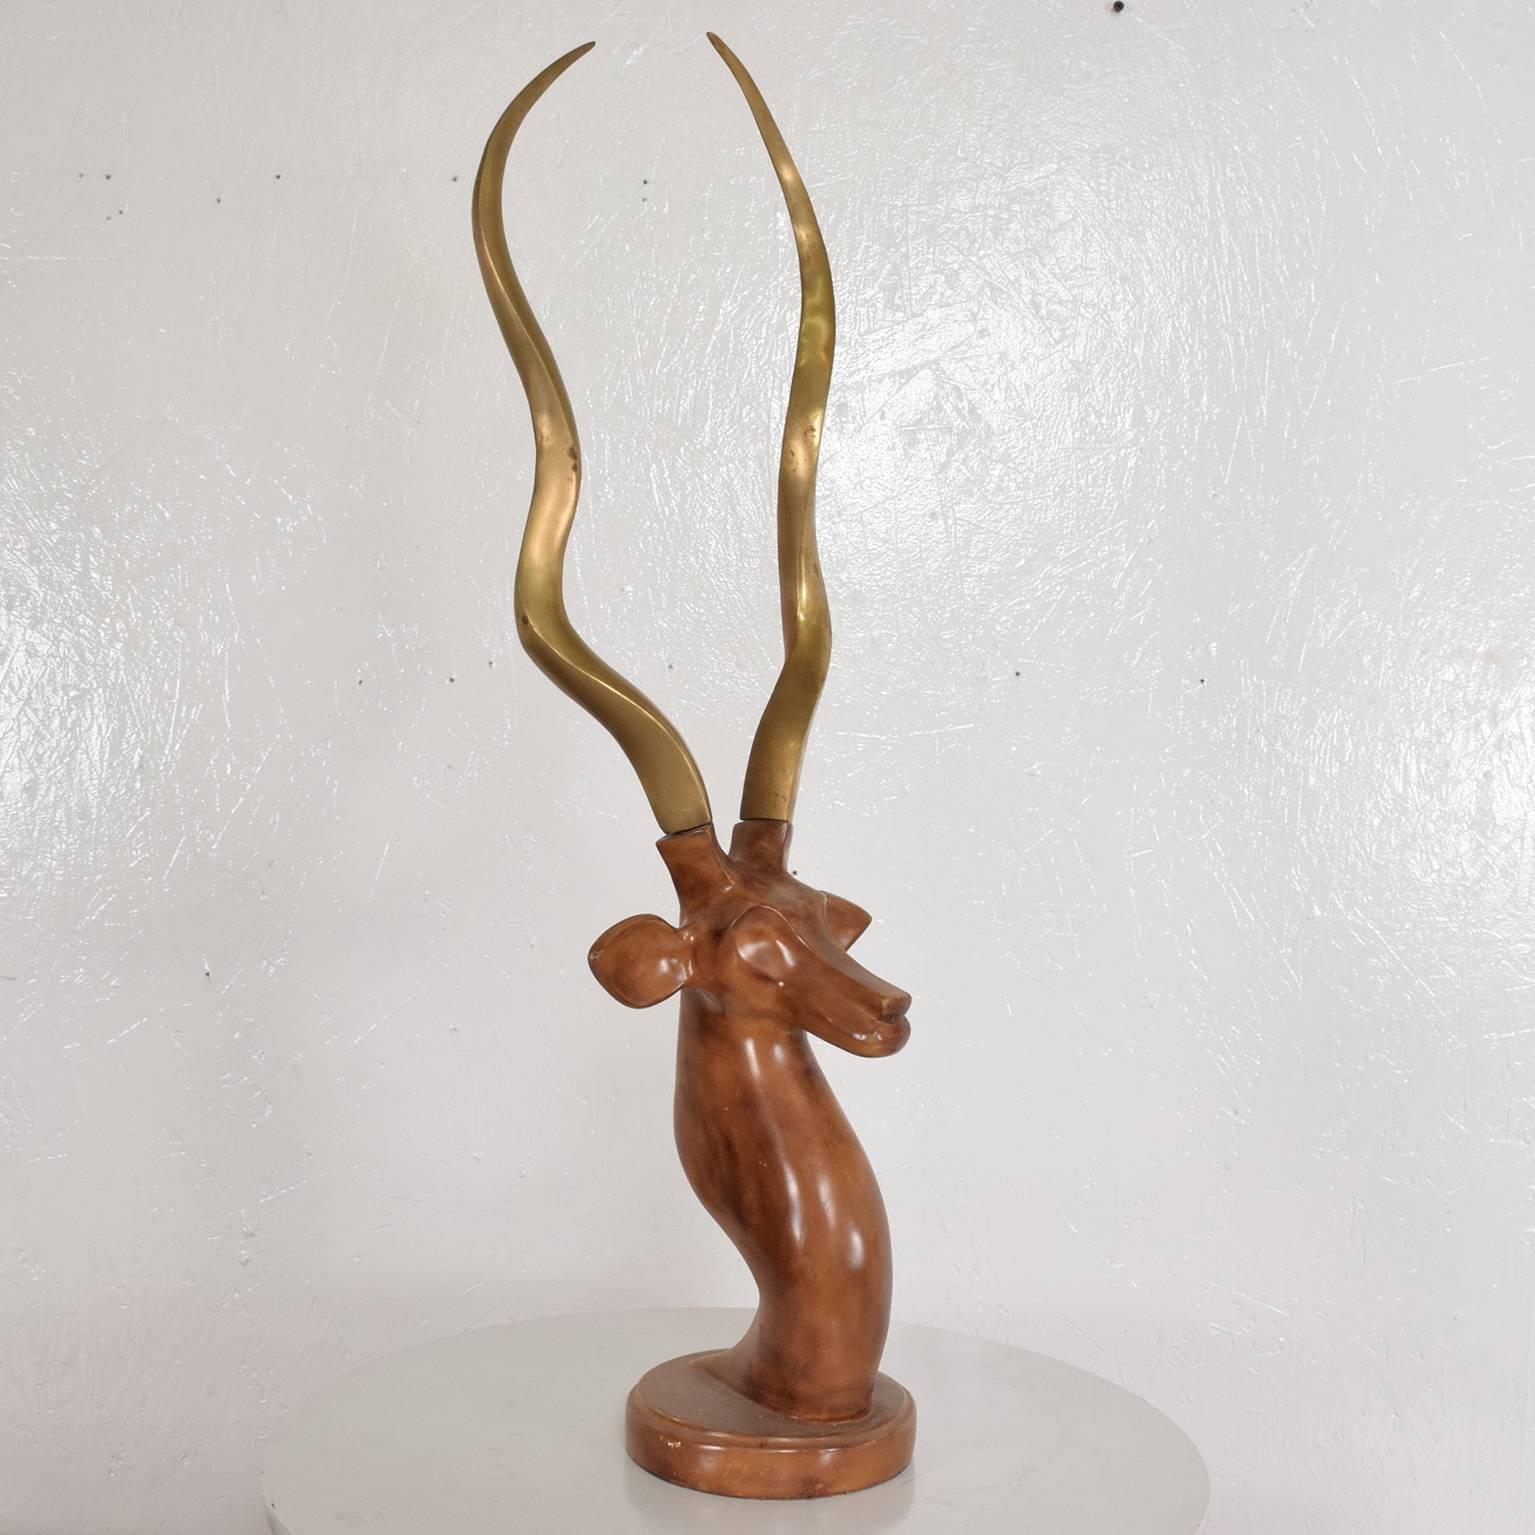 Painted Midcentury Style Metal Gazelle with Brass Antlers